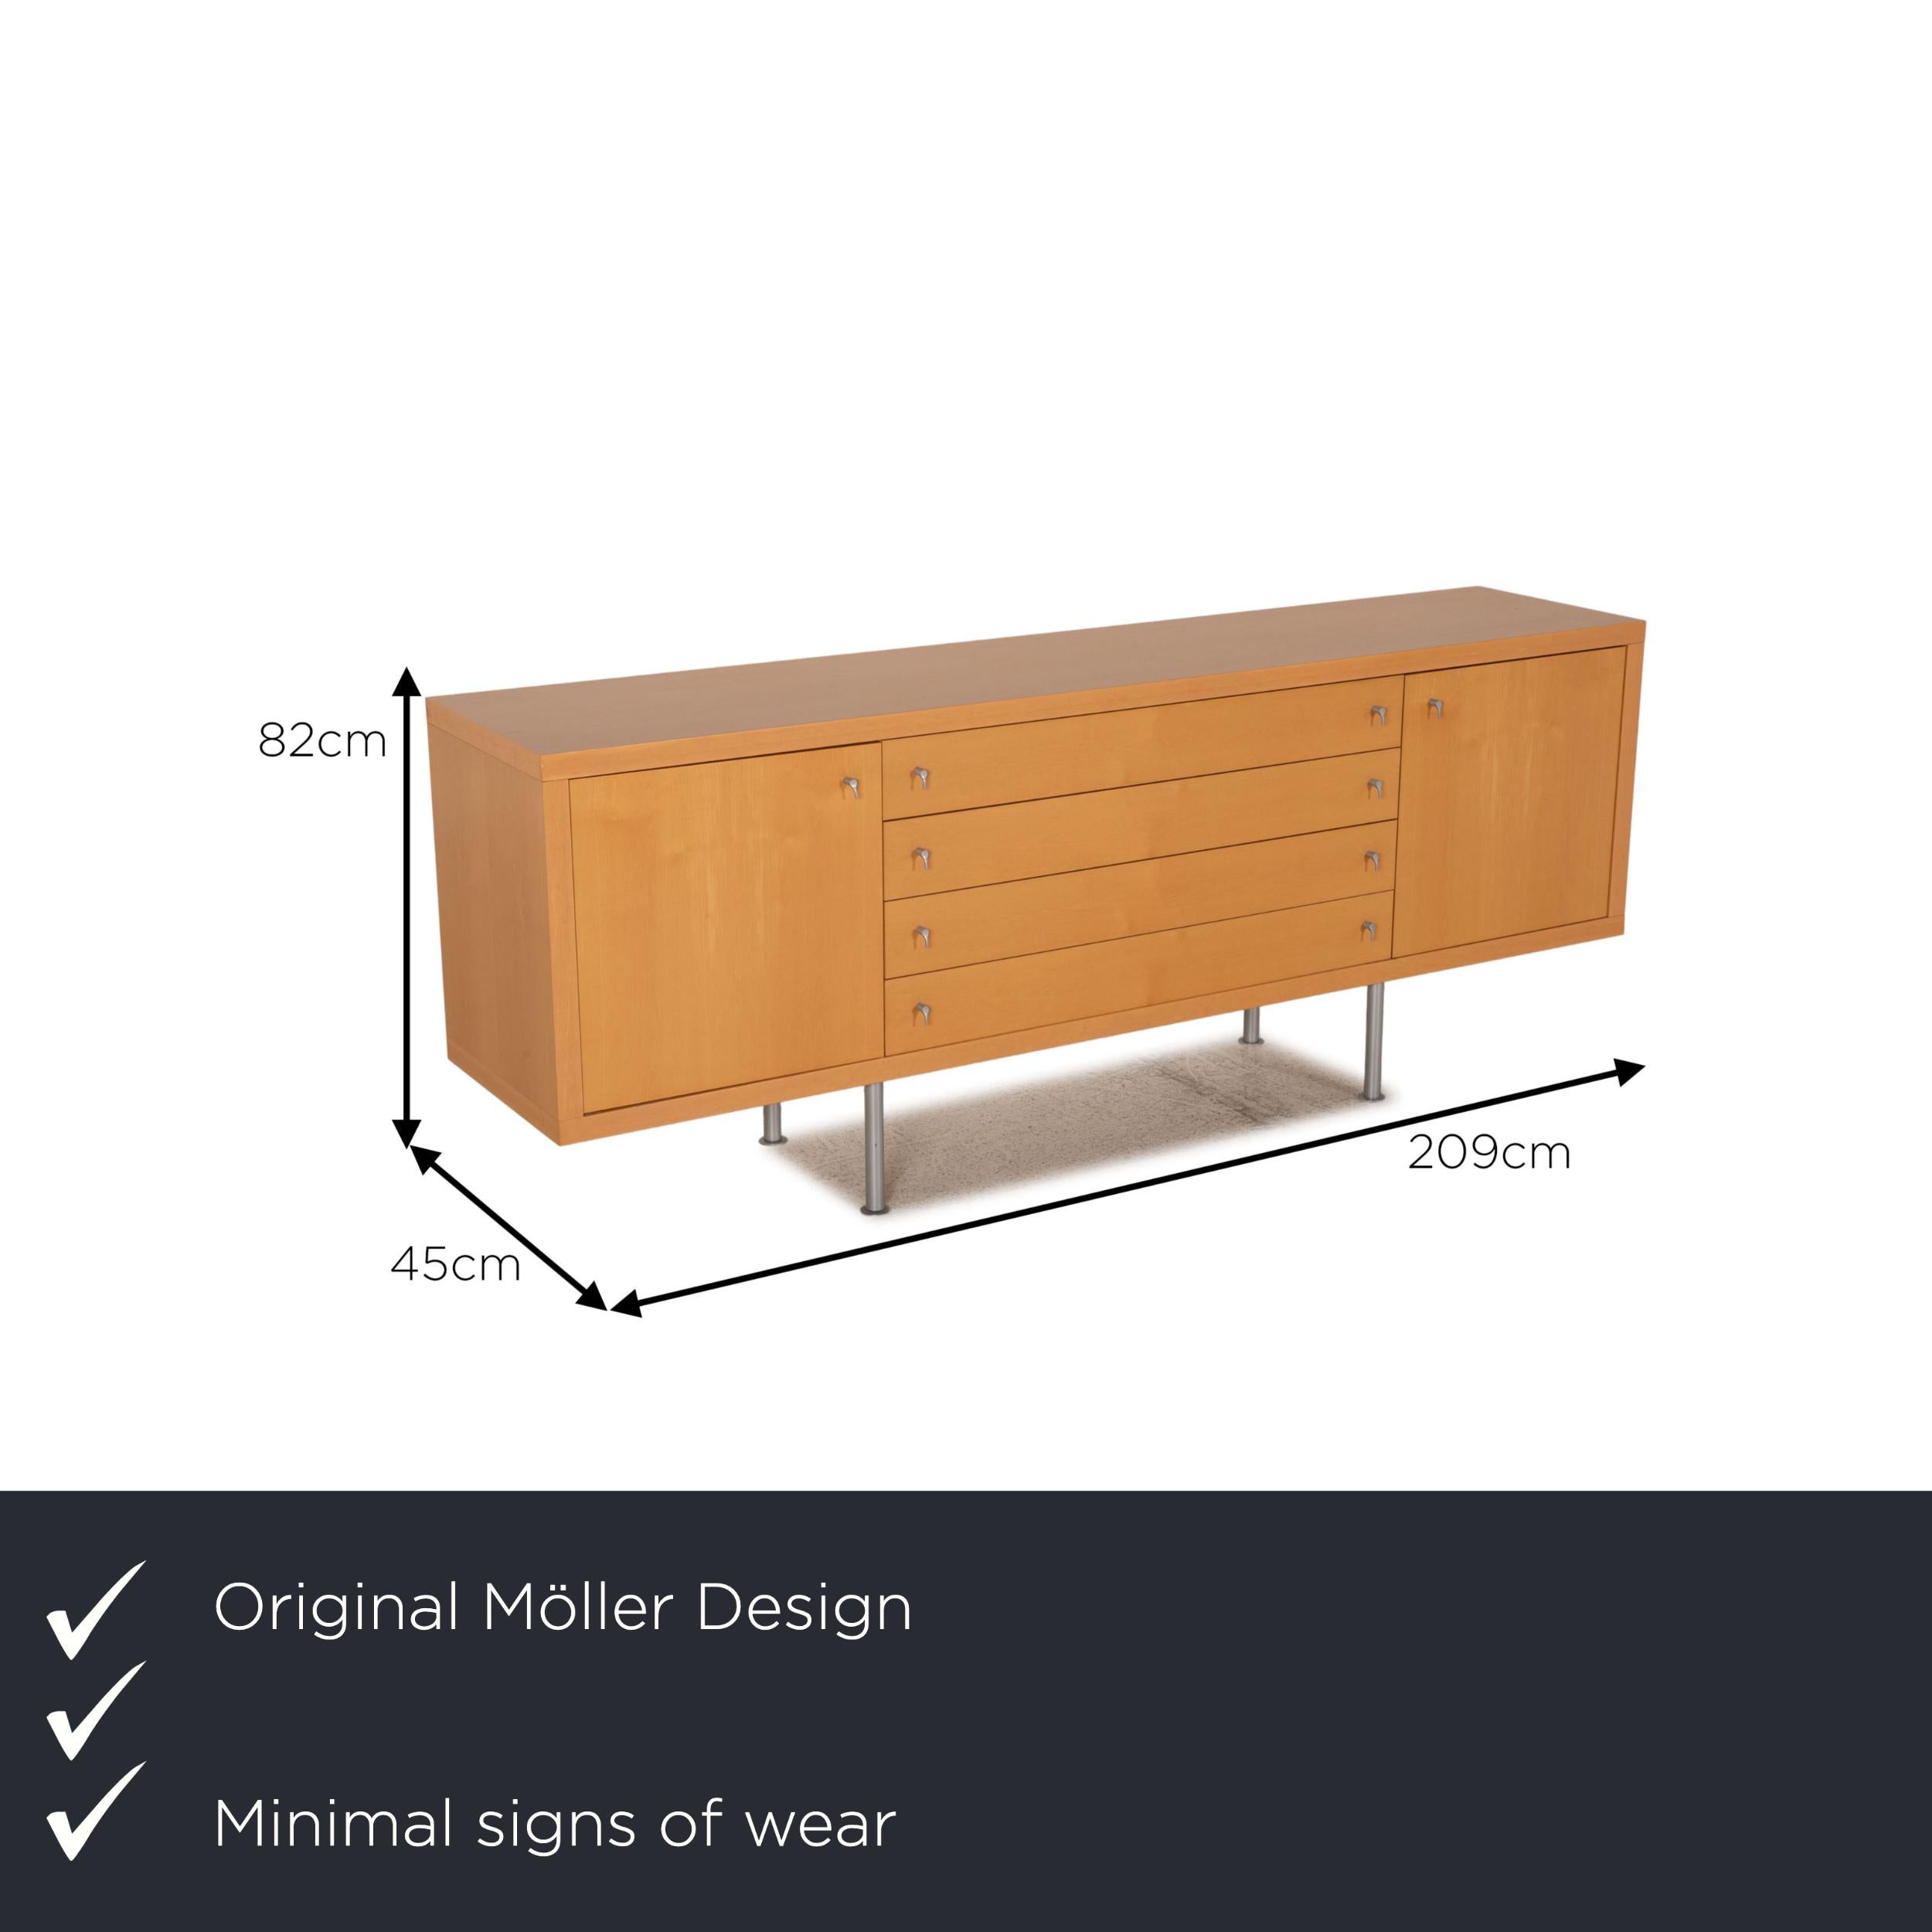 We present to you a Möller Design wood sideboard brown.

Product measurements in centimeters:

depth: 45
width: 209
height: 82
seat height: 
rest height: 
seat depth: 
seat width: 
back height:

 